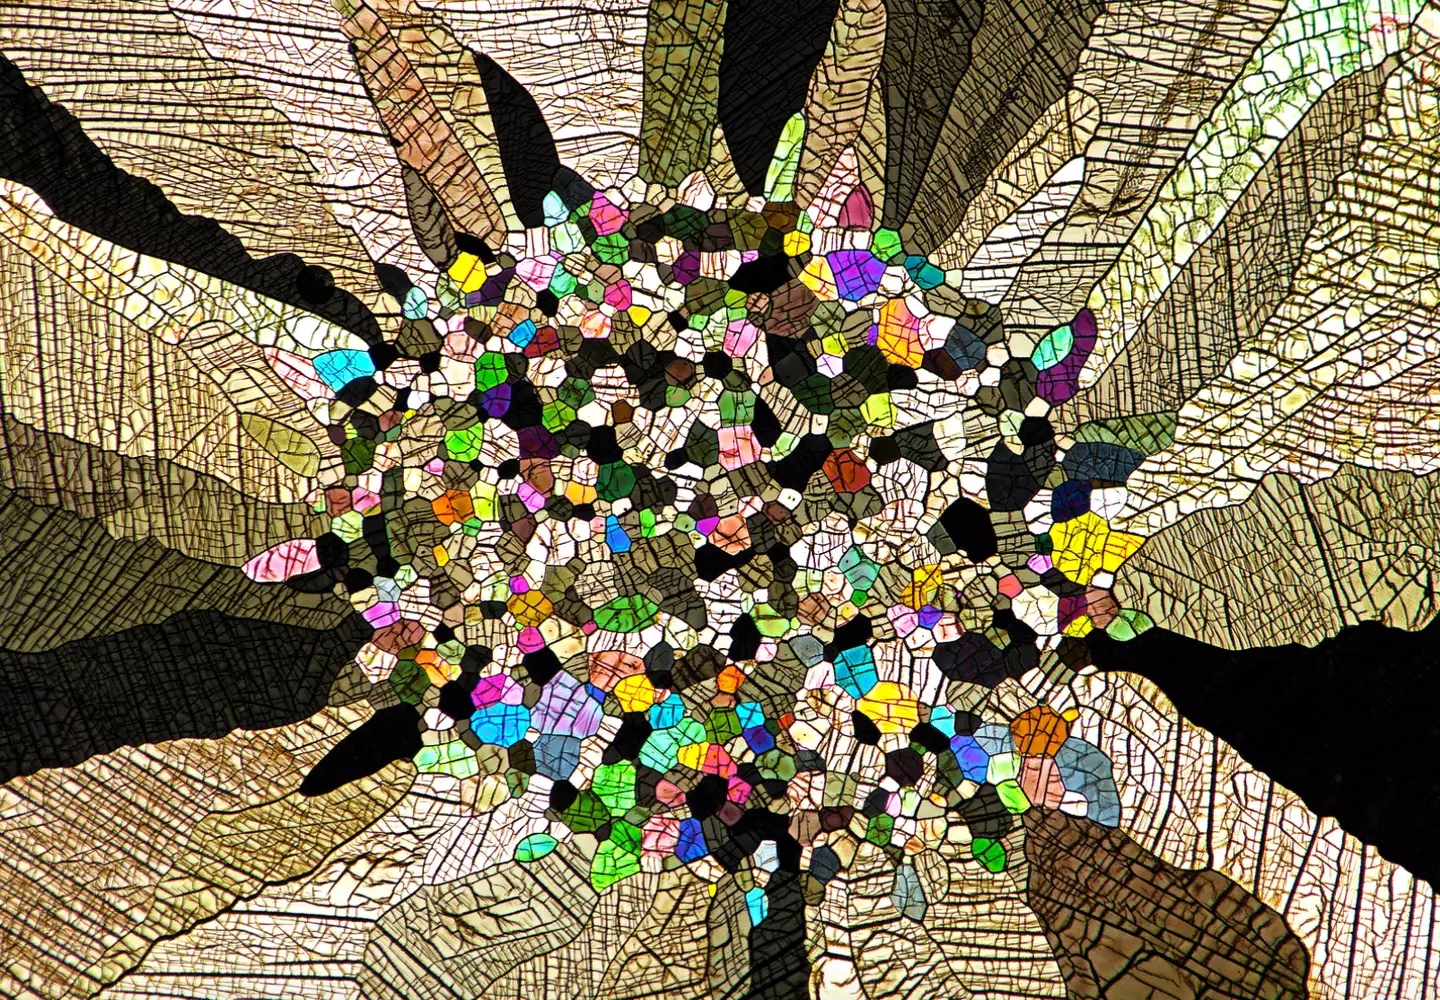 One of the photos to make the top 20 shows caffeine crystals.